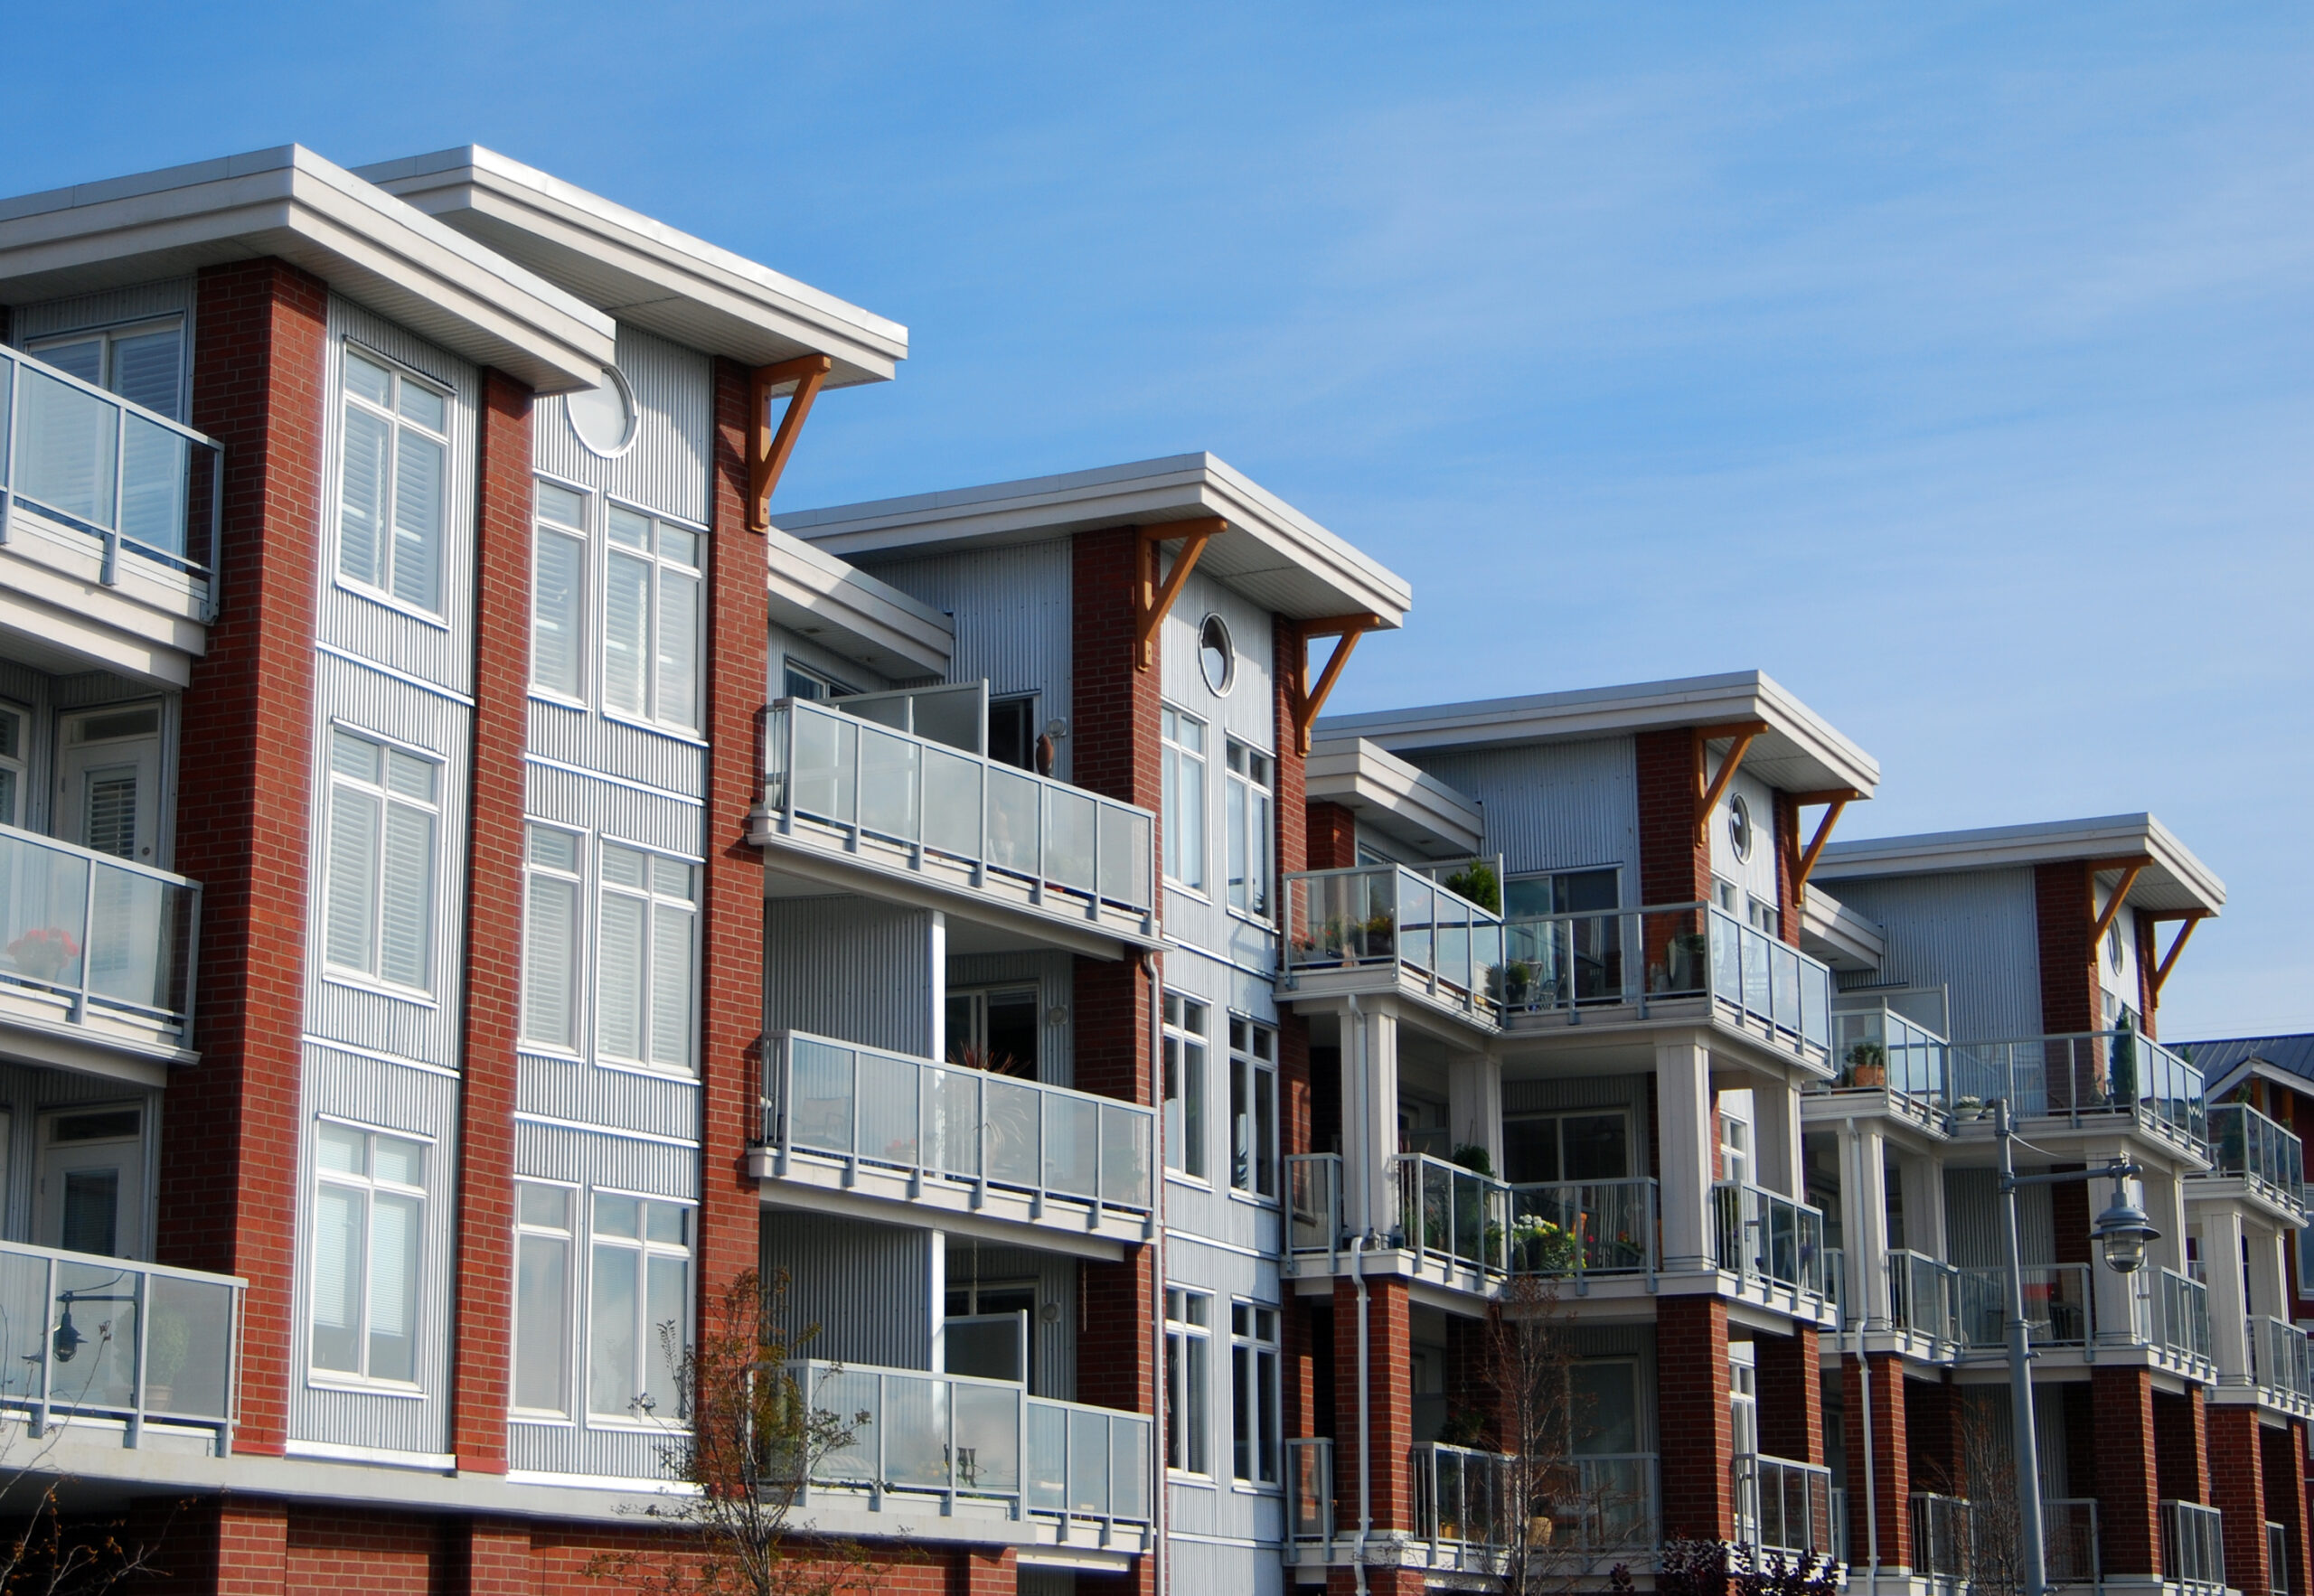 Multifamily is Well-Positioned for Short- and Long-Term Growth